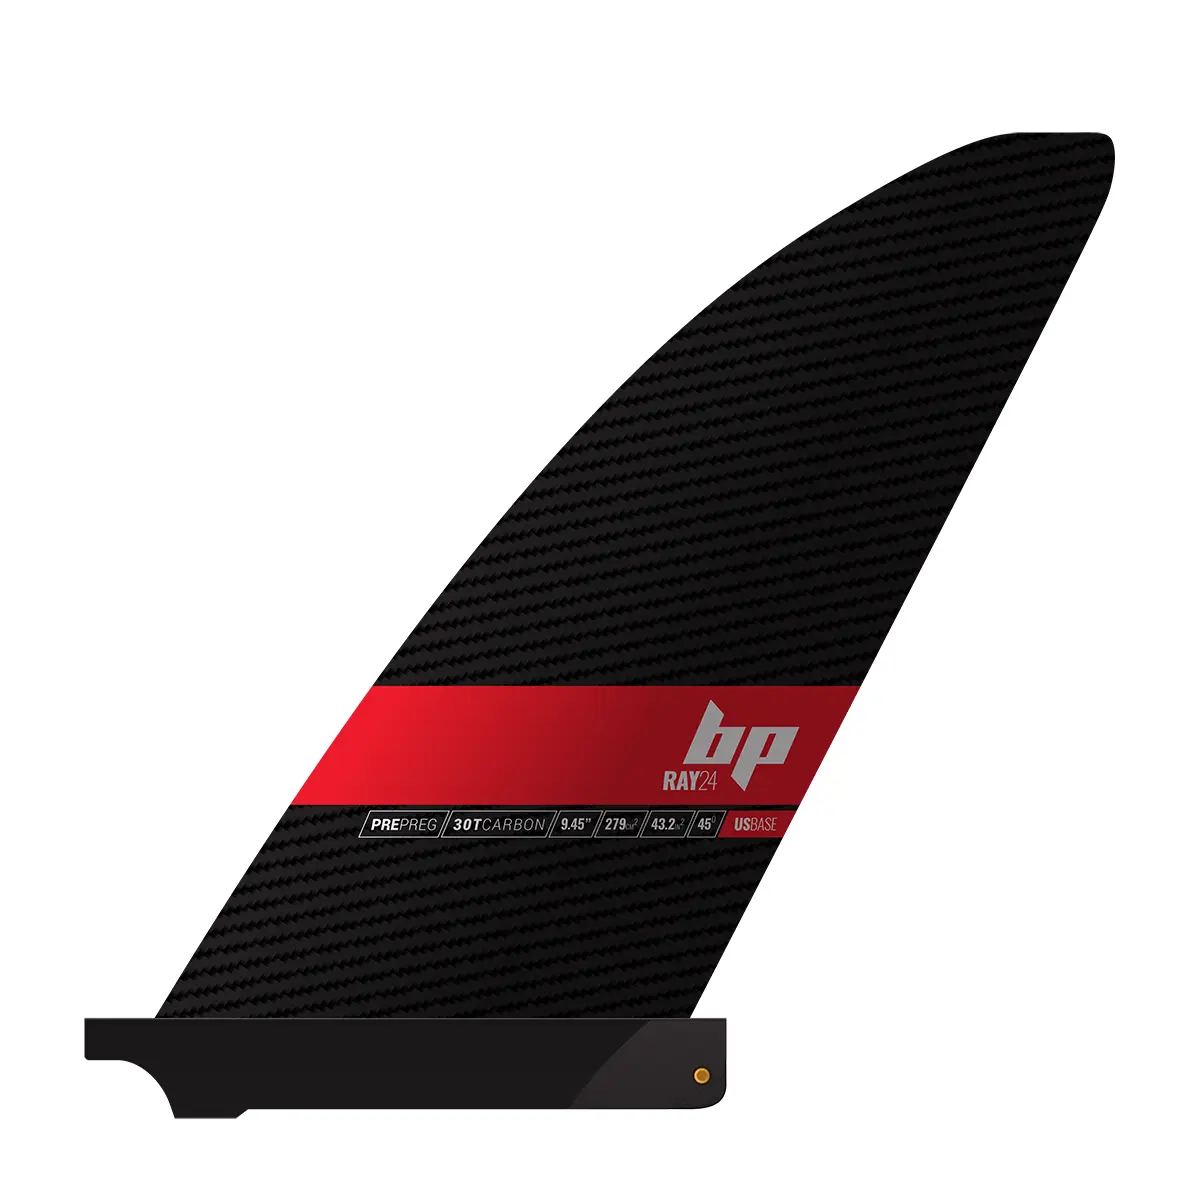 Black Project SUP- Fin RAY v2 - US base